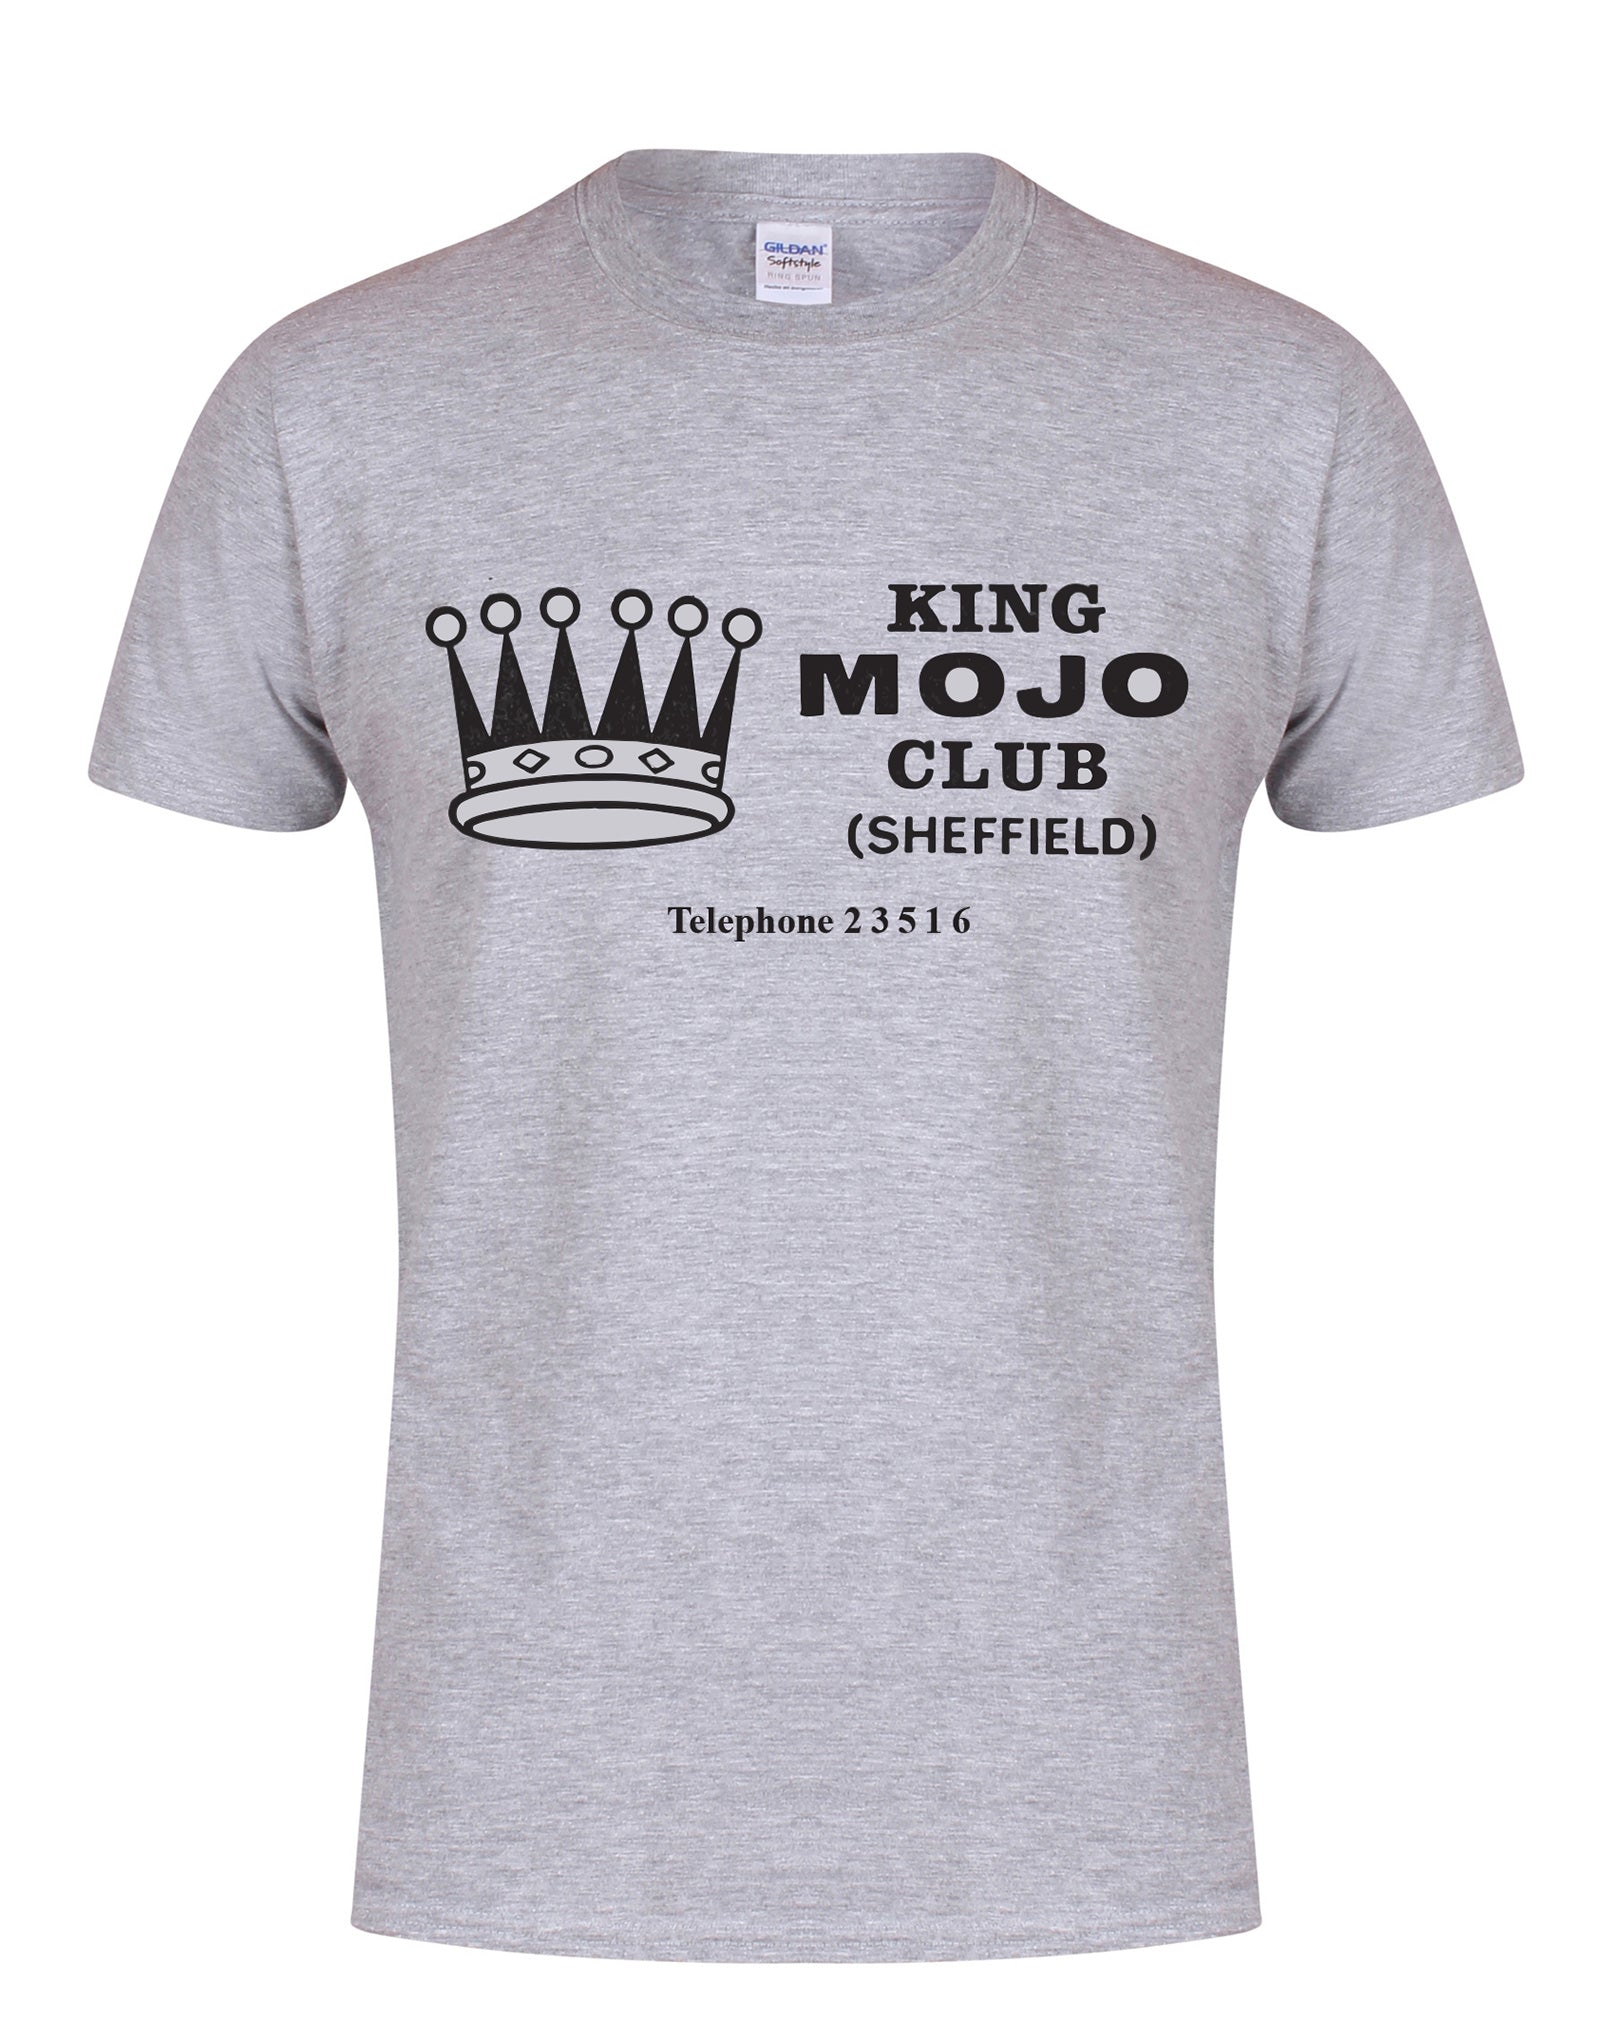 King Mojo unisex fit T-shirt - various colours - Dirty Stop Outs